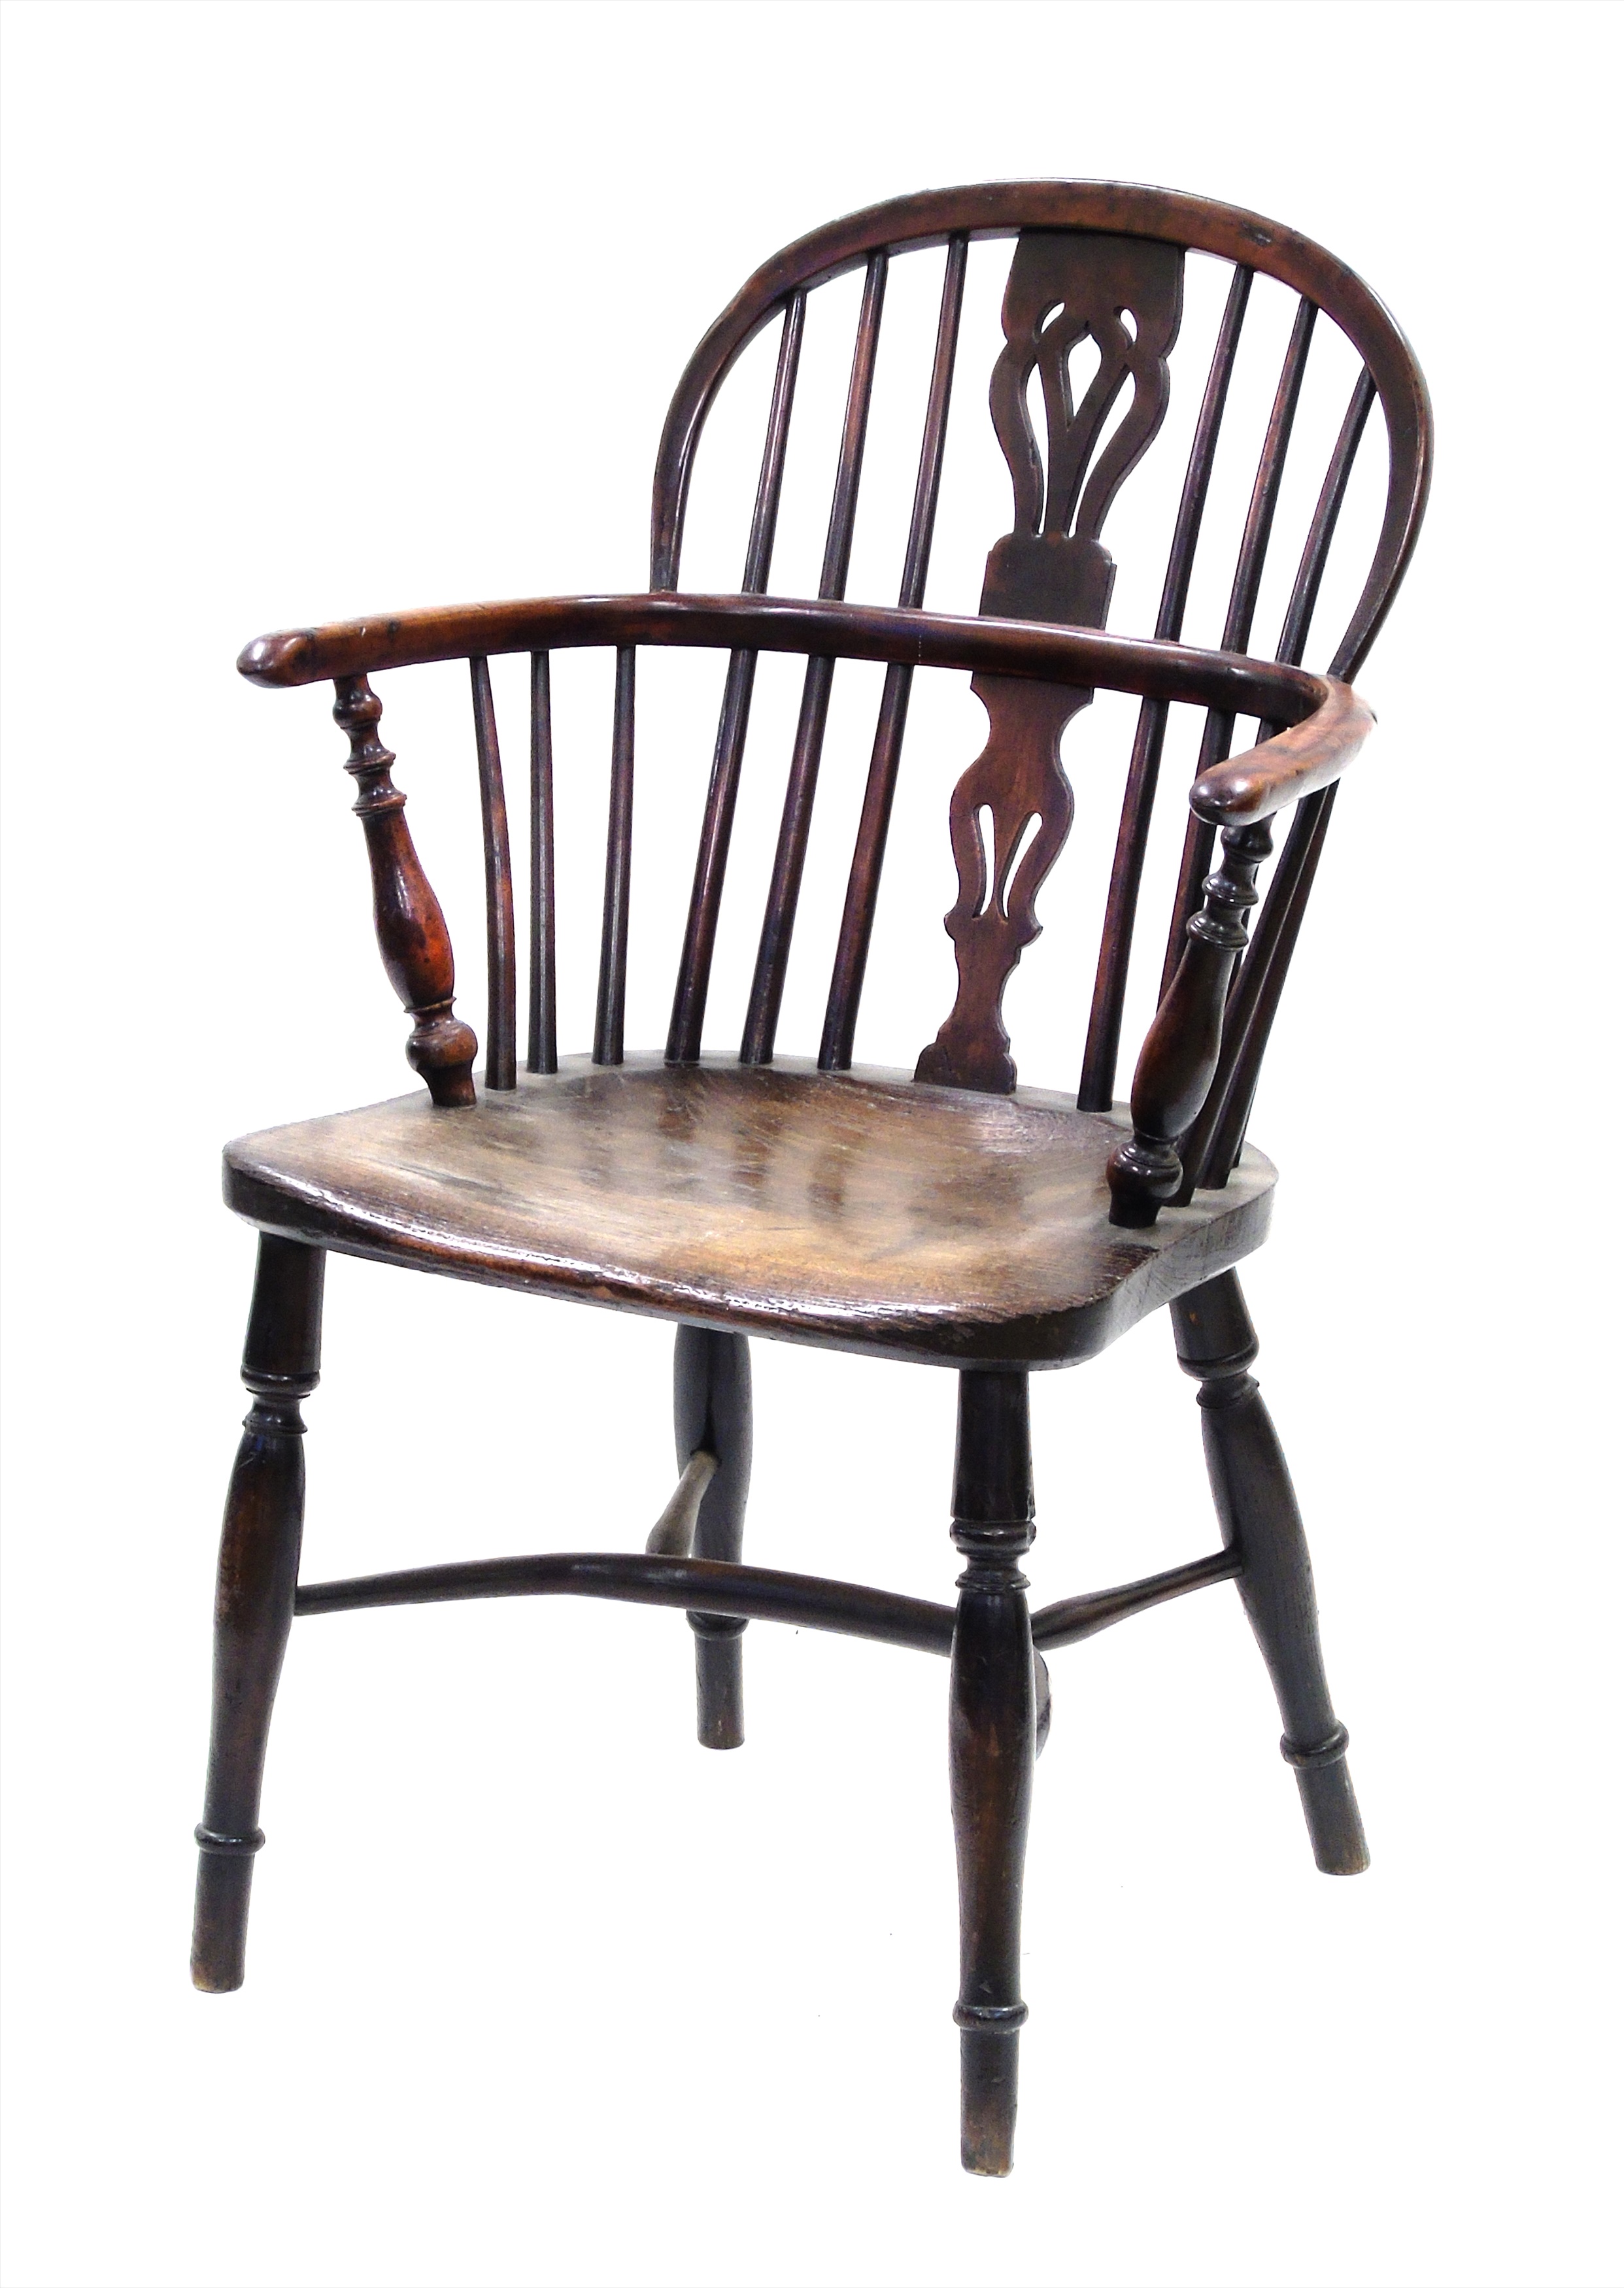 Early 19th century yew and elm low-back Windsor chair